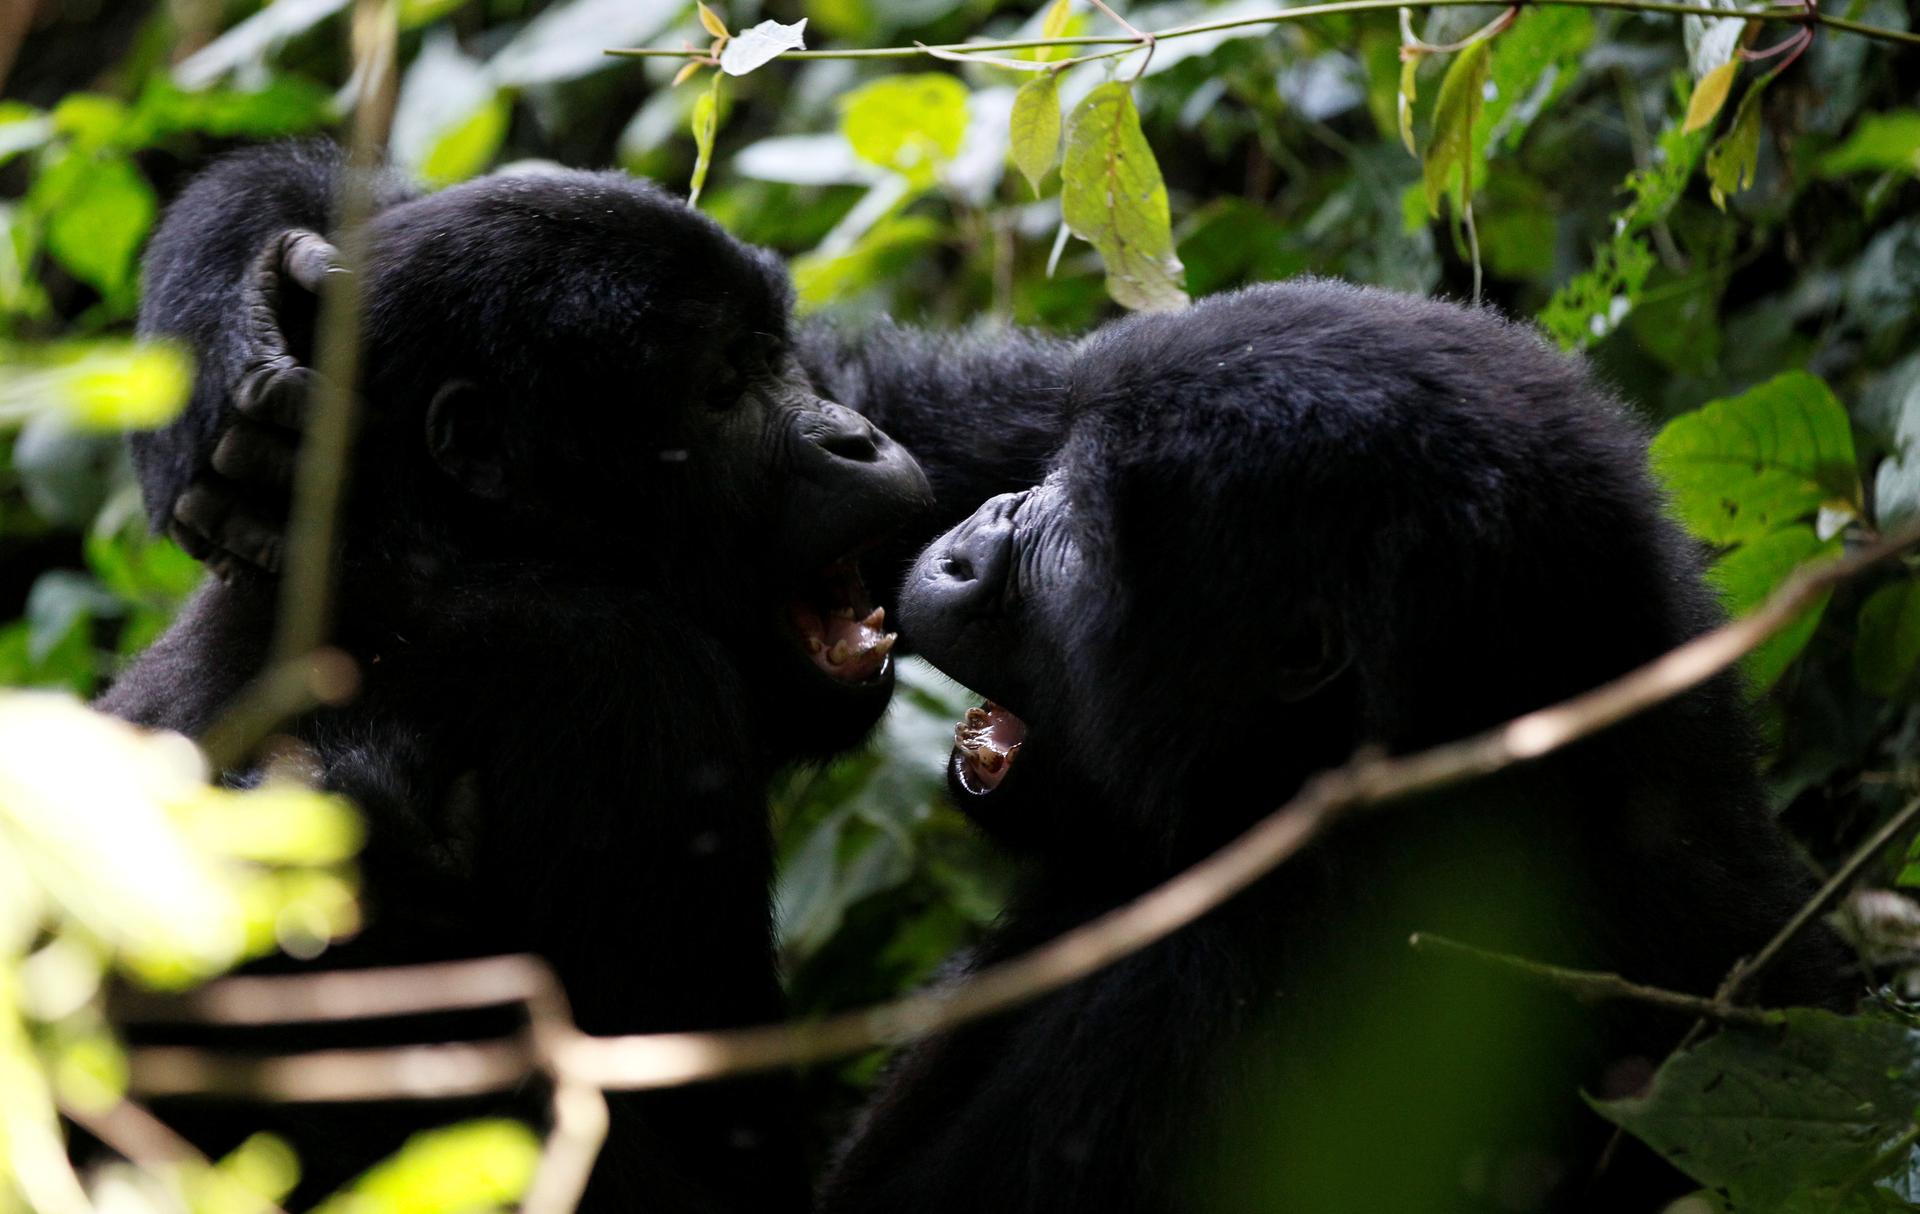 Two baby gorillas play in a forest